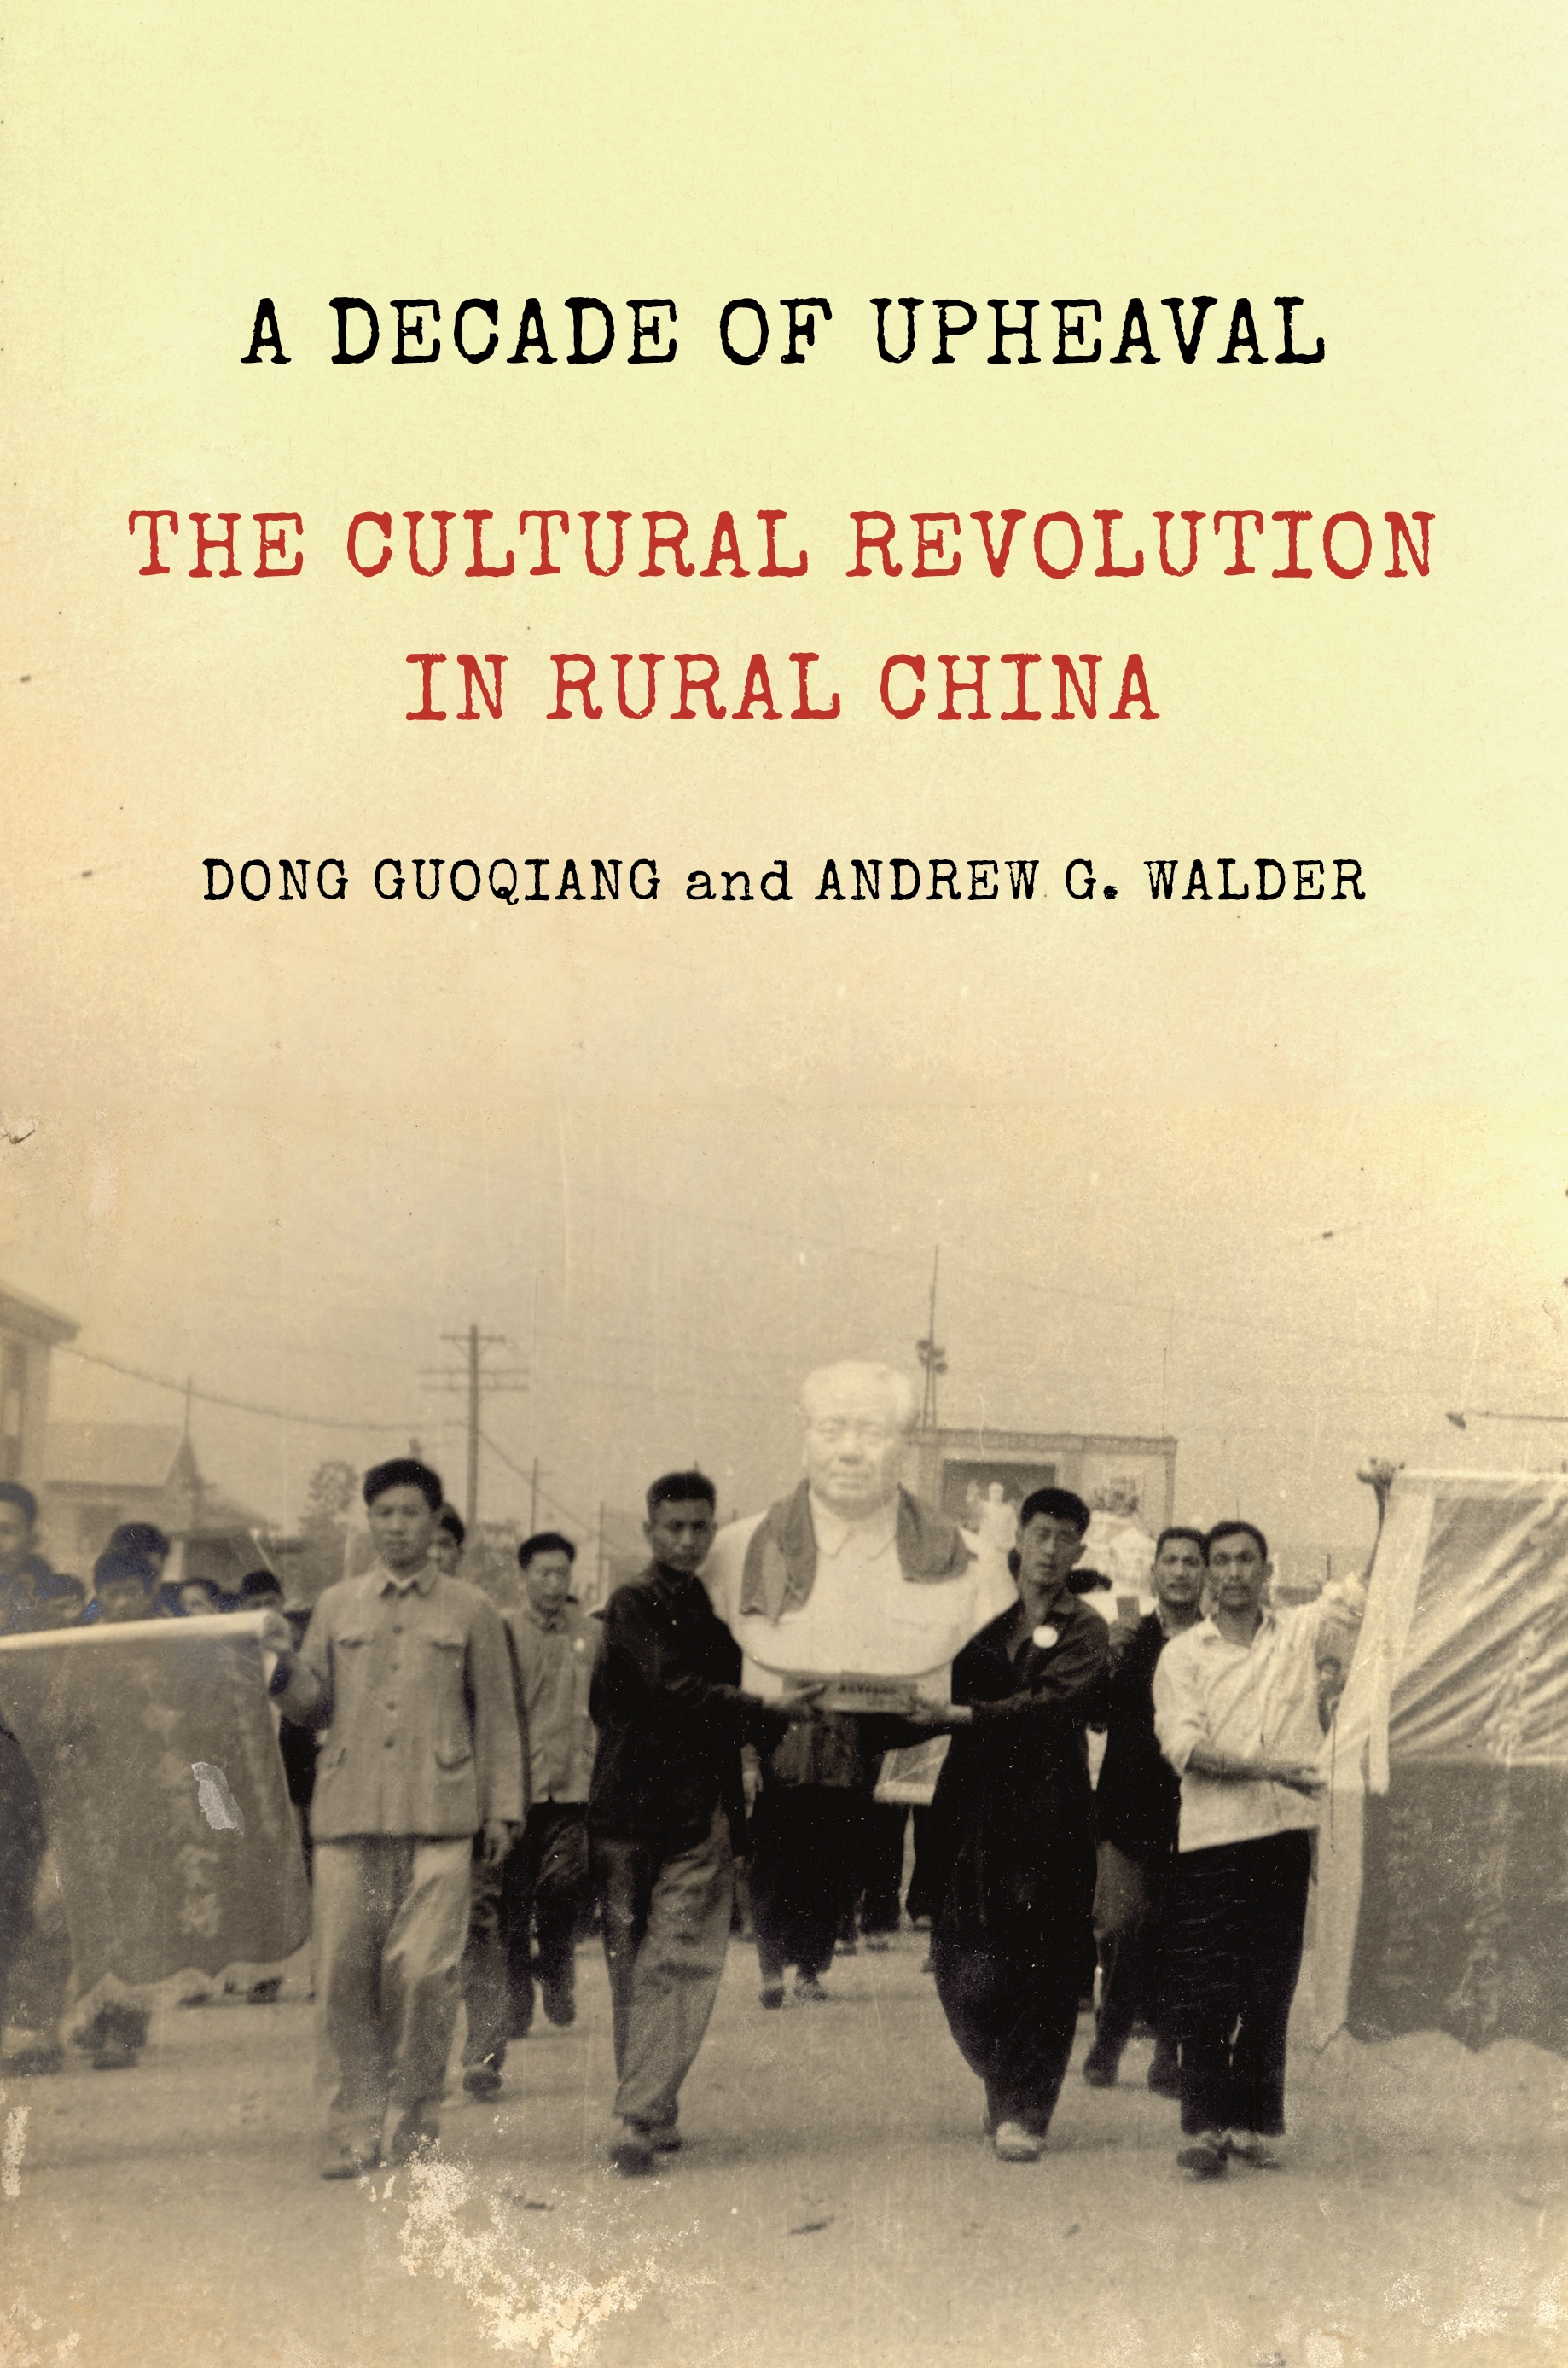 Cover of A Decade of Upheaval: The Cultural Revolution in Rural China by Dong Guoqiang and Andrew G. Walder.